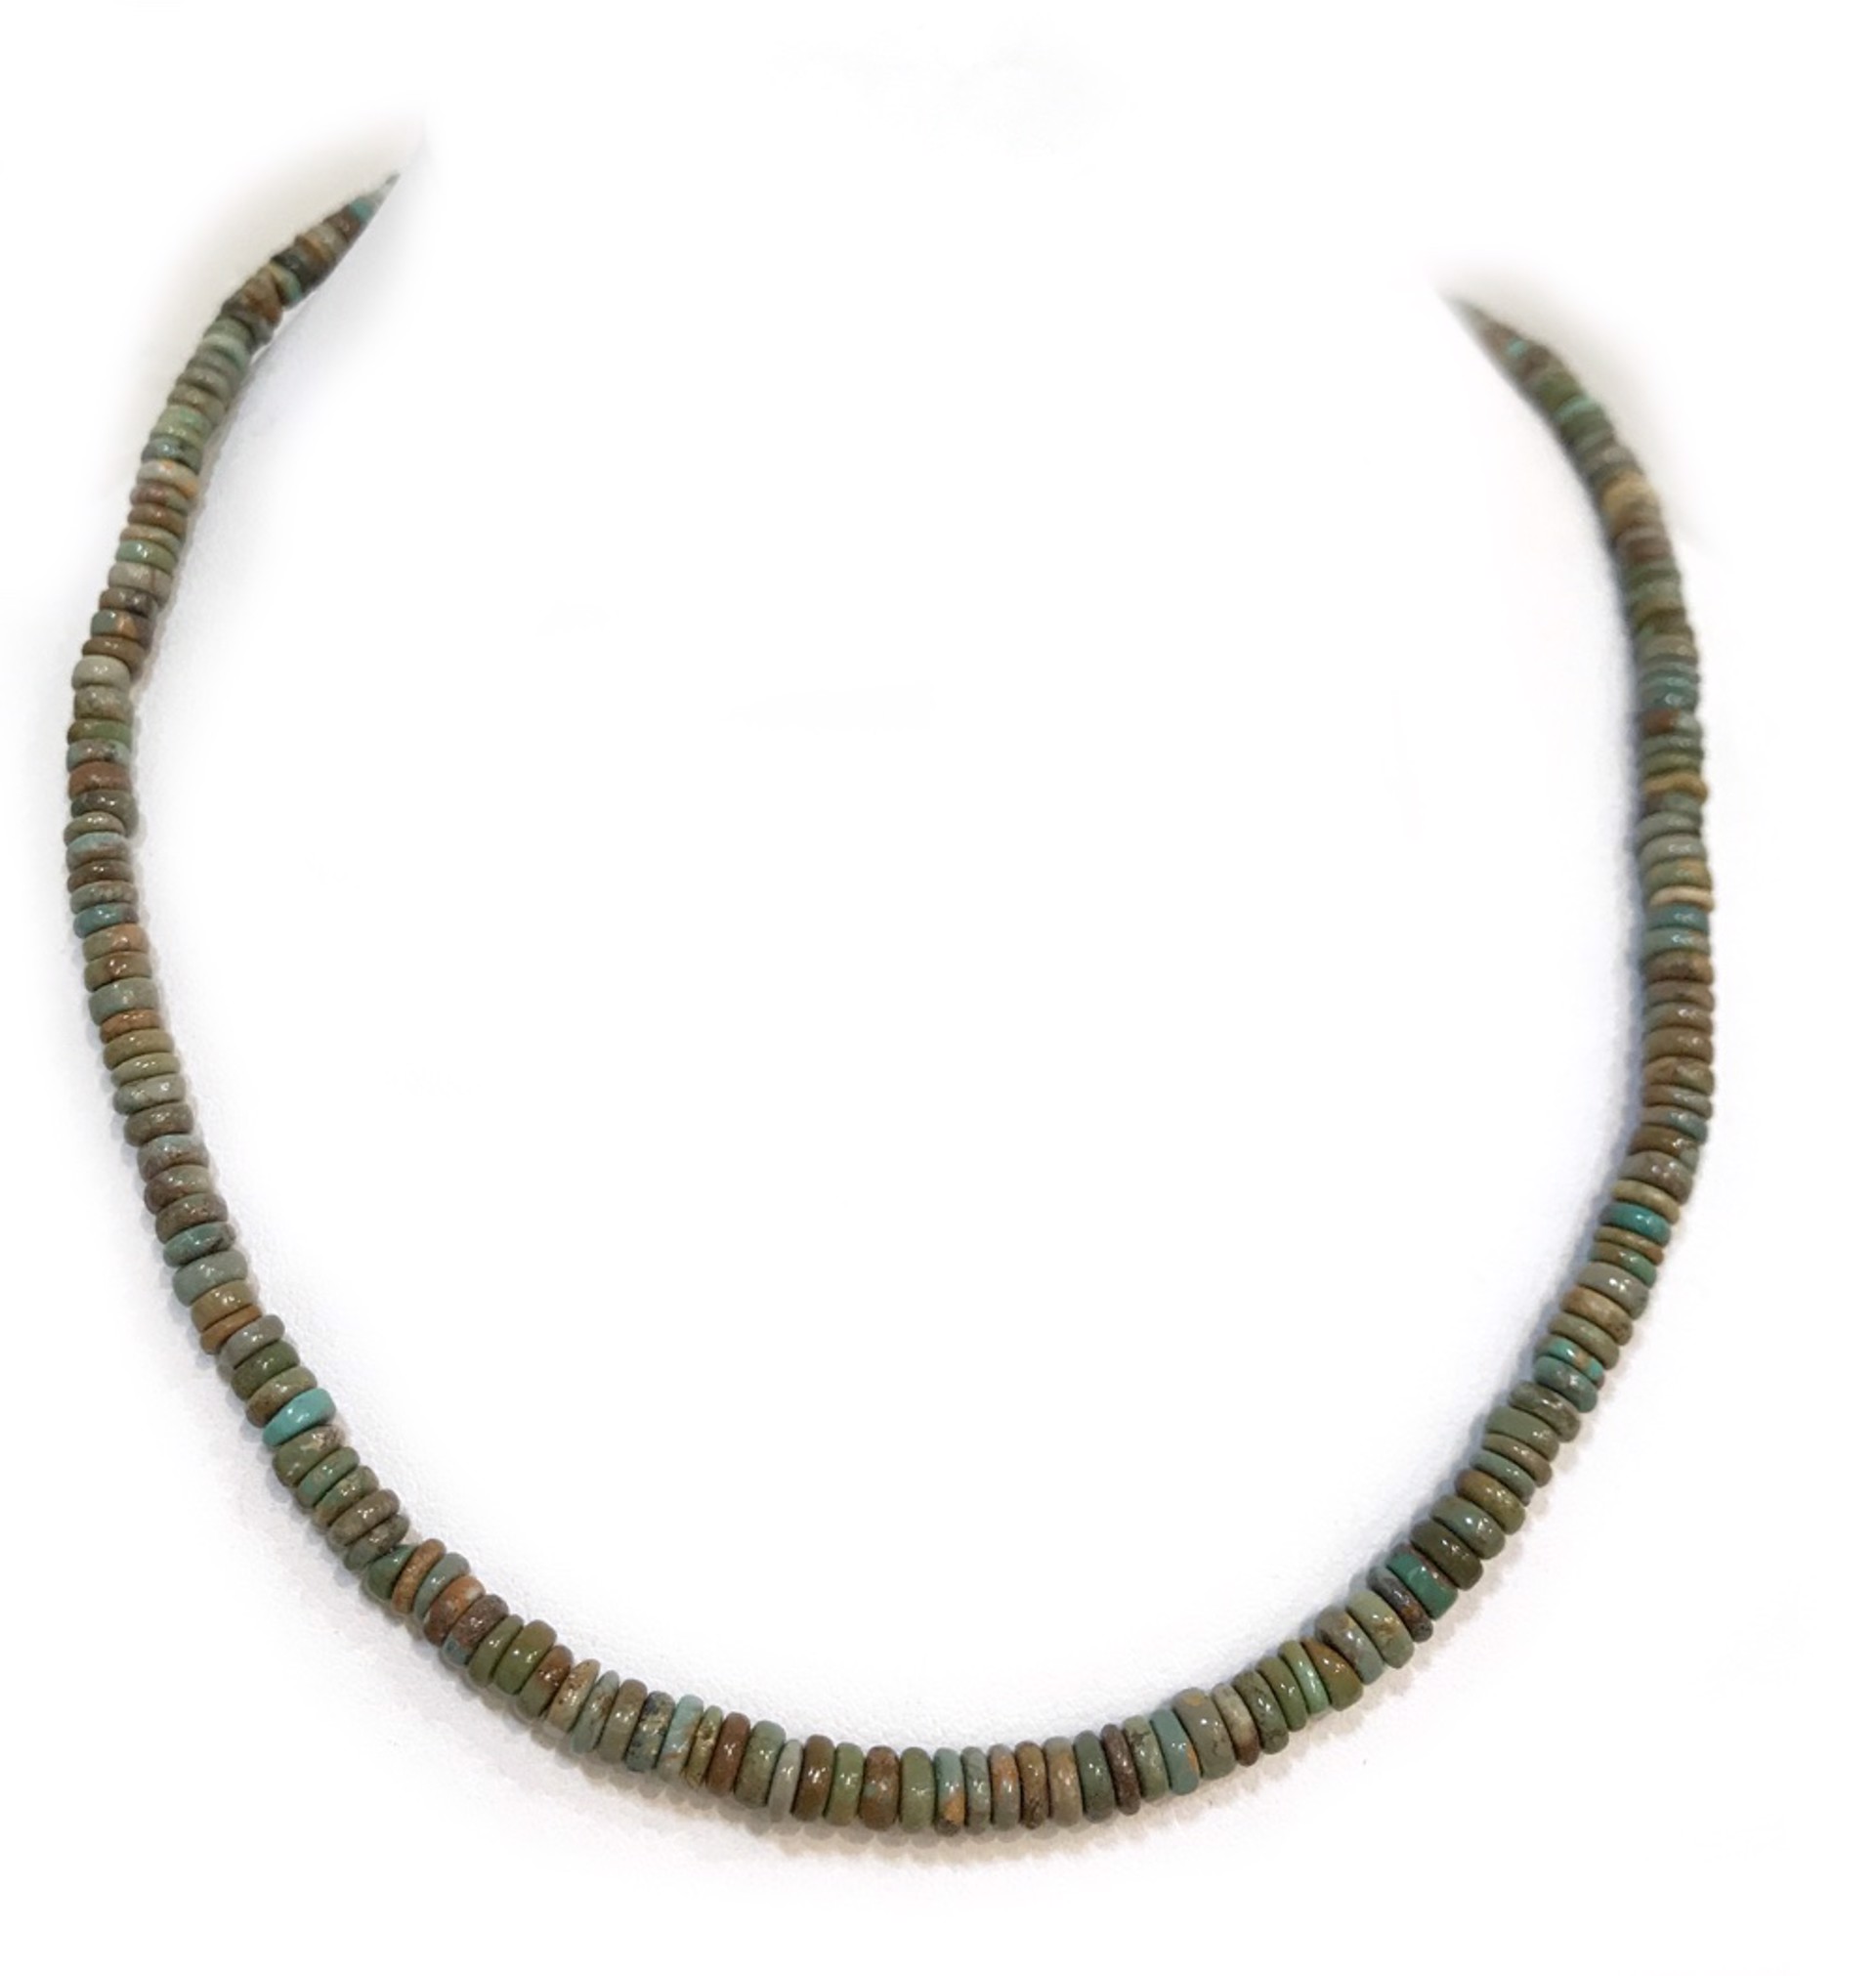 Necklace - 16" Green Turquoise by Indigo Desert Ranch - Jewelry